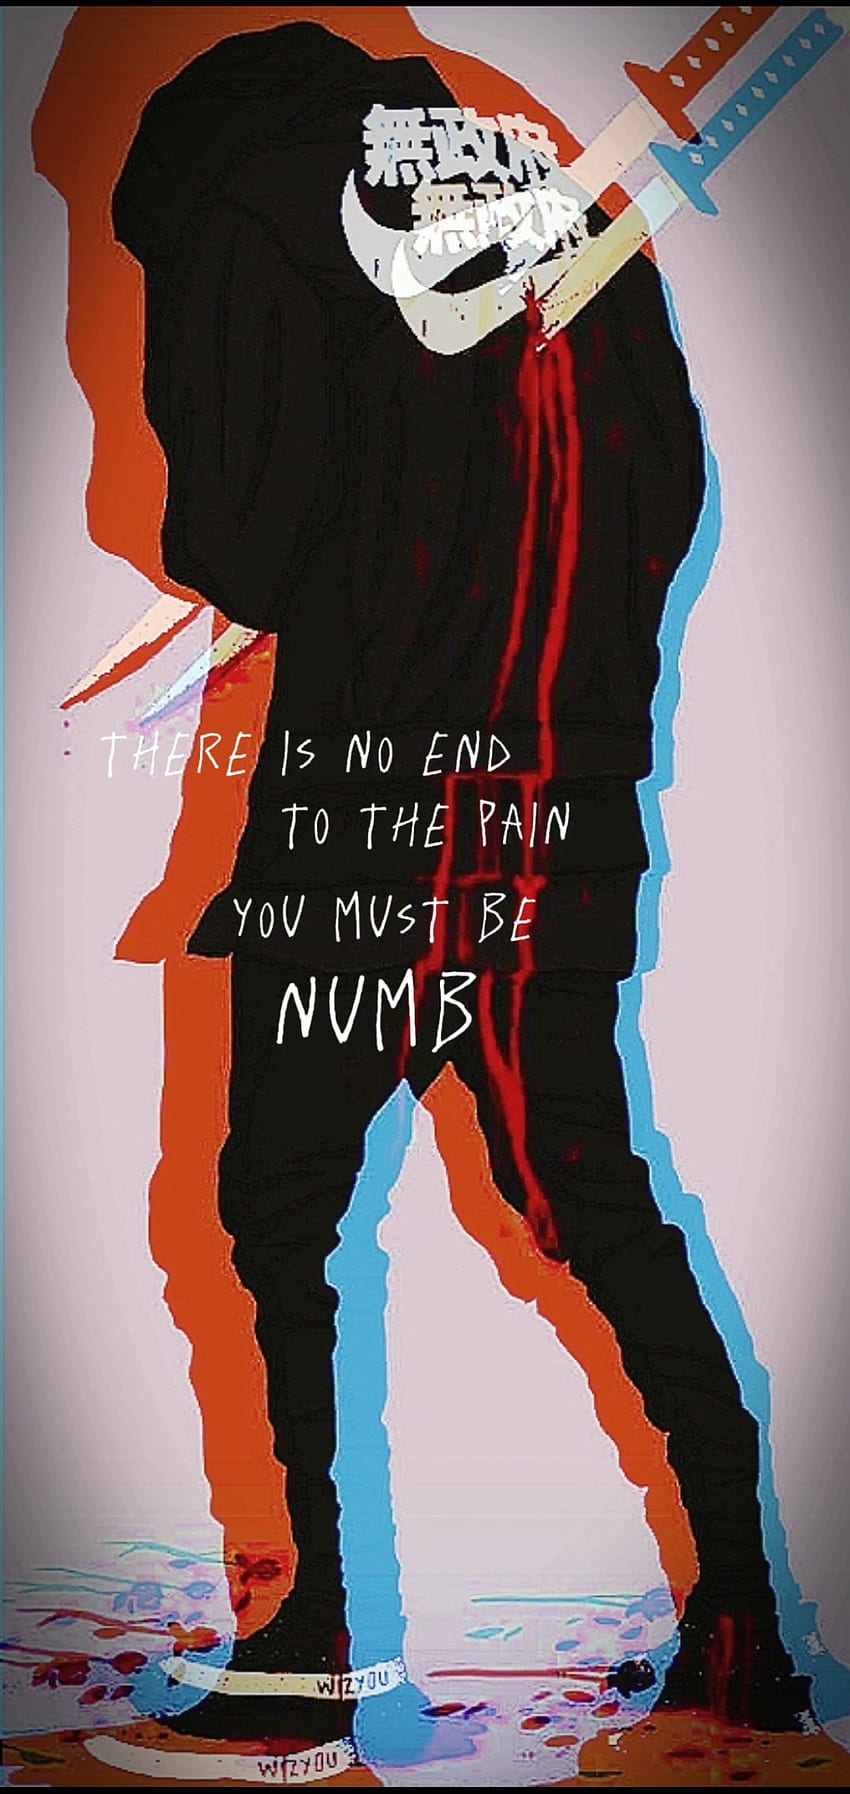 Numb wallpaper by cLuBbiNbOy  Download on ZEDGE  3eb8